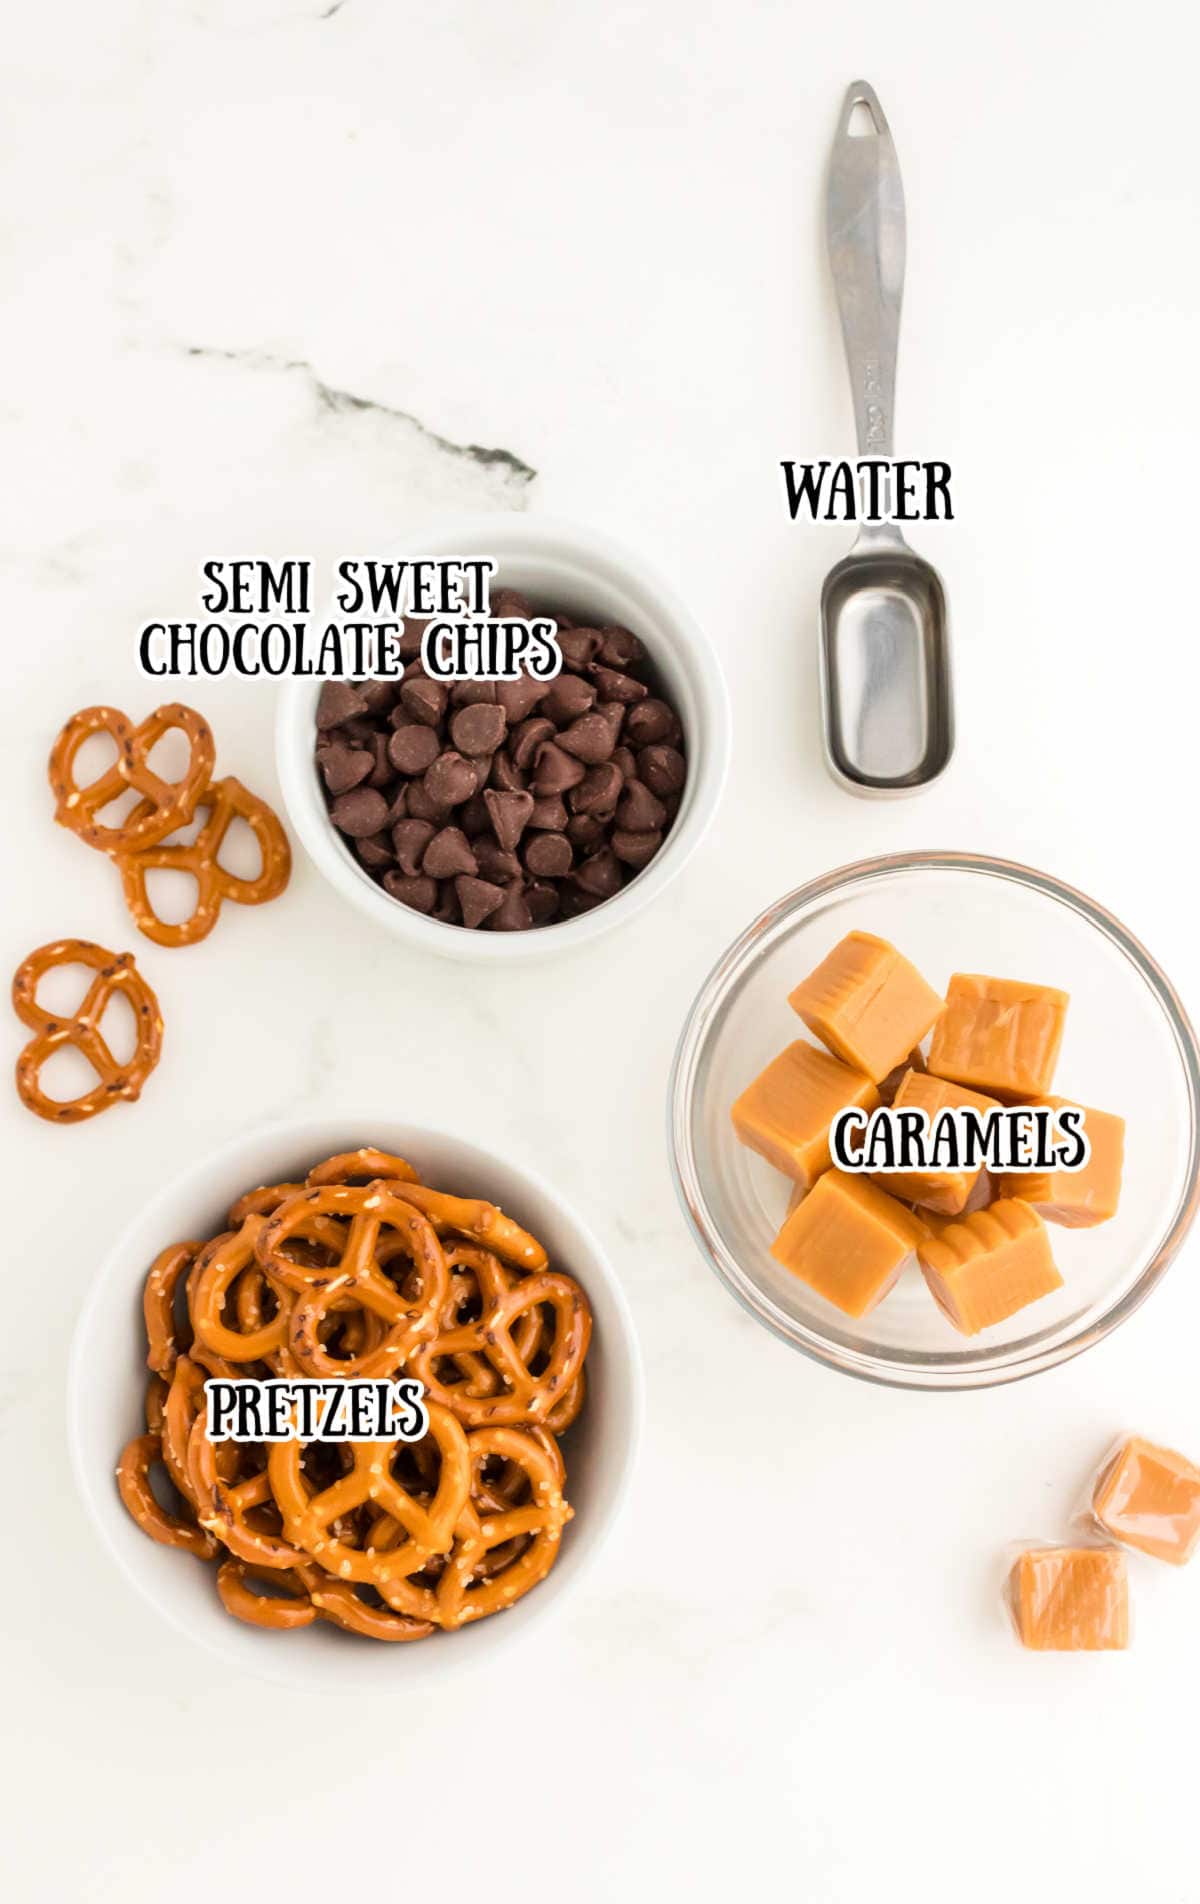 All the ingredients needed for this pretzel bark.